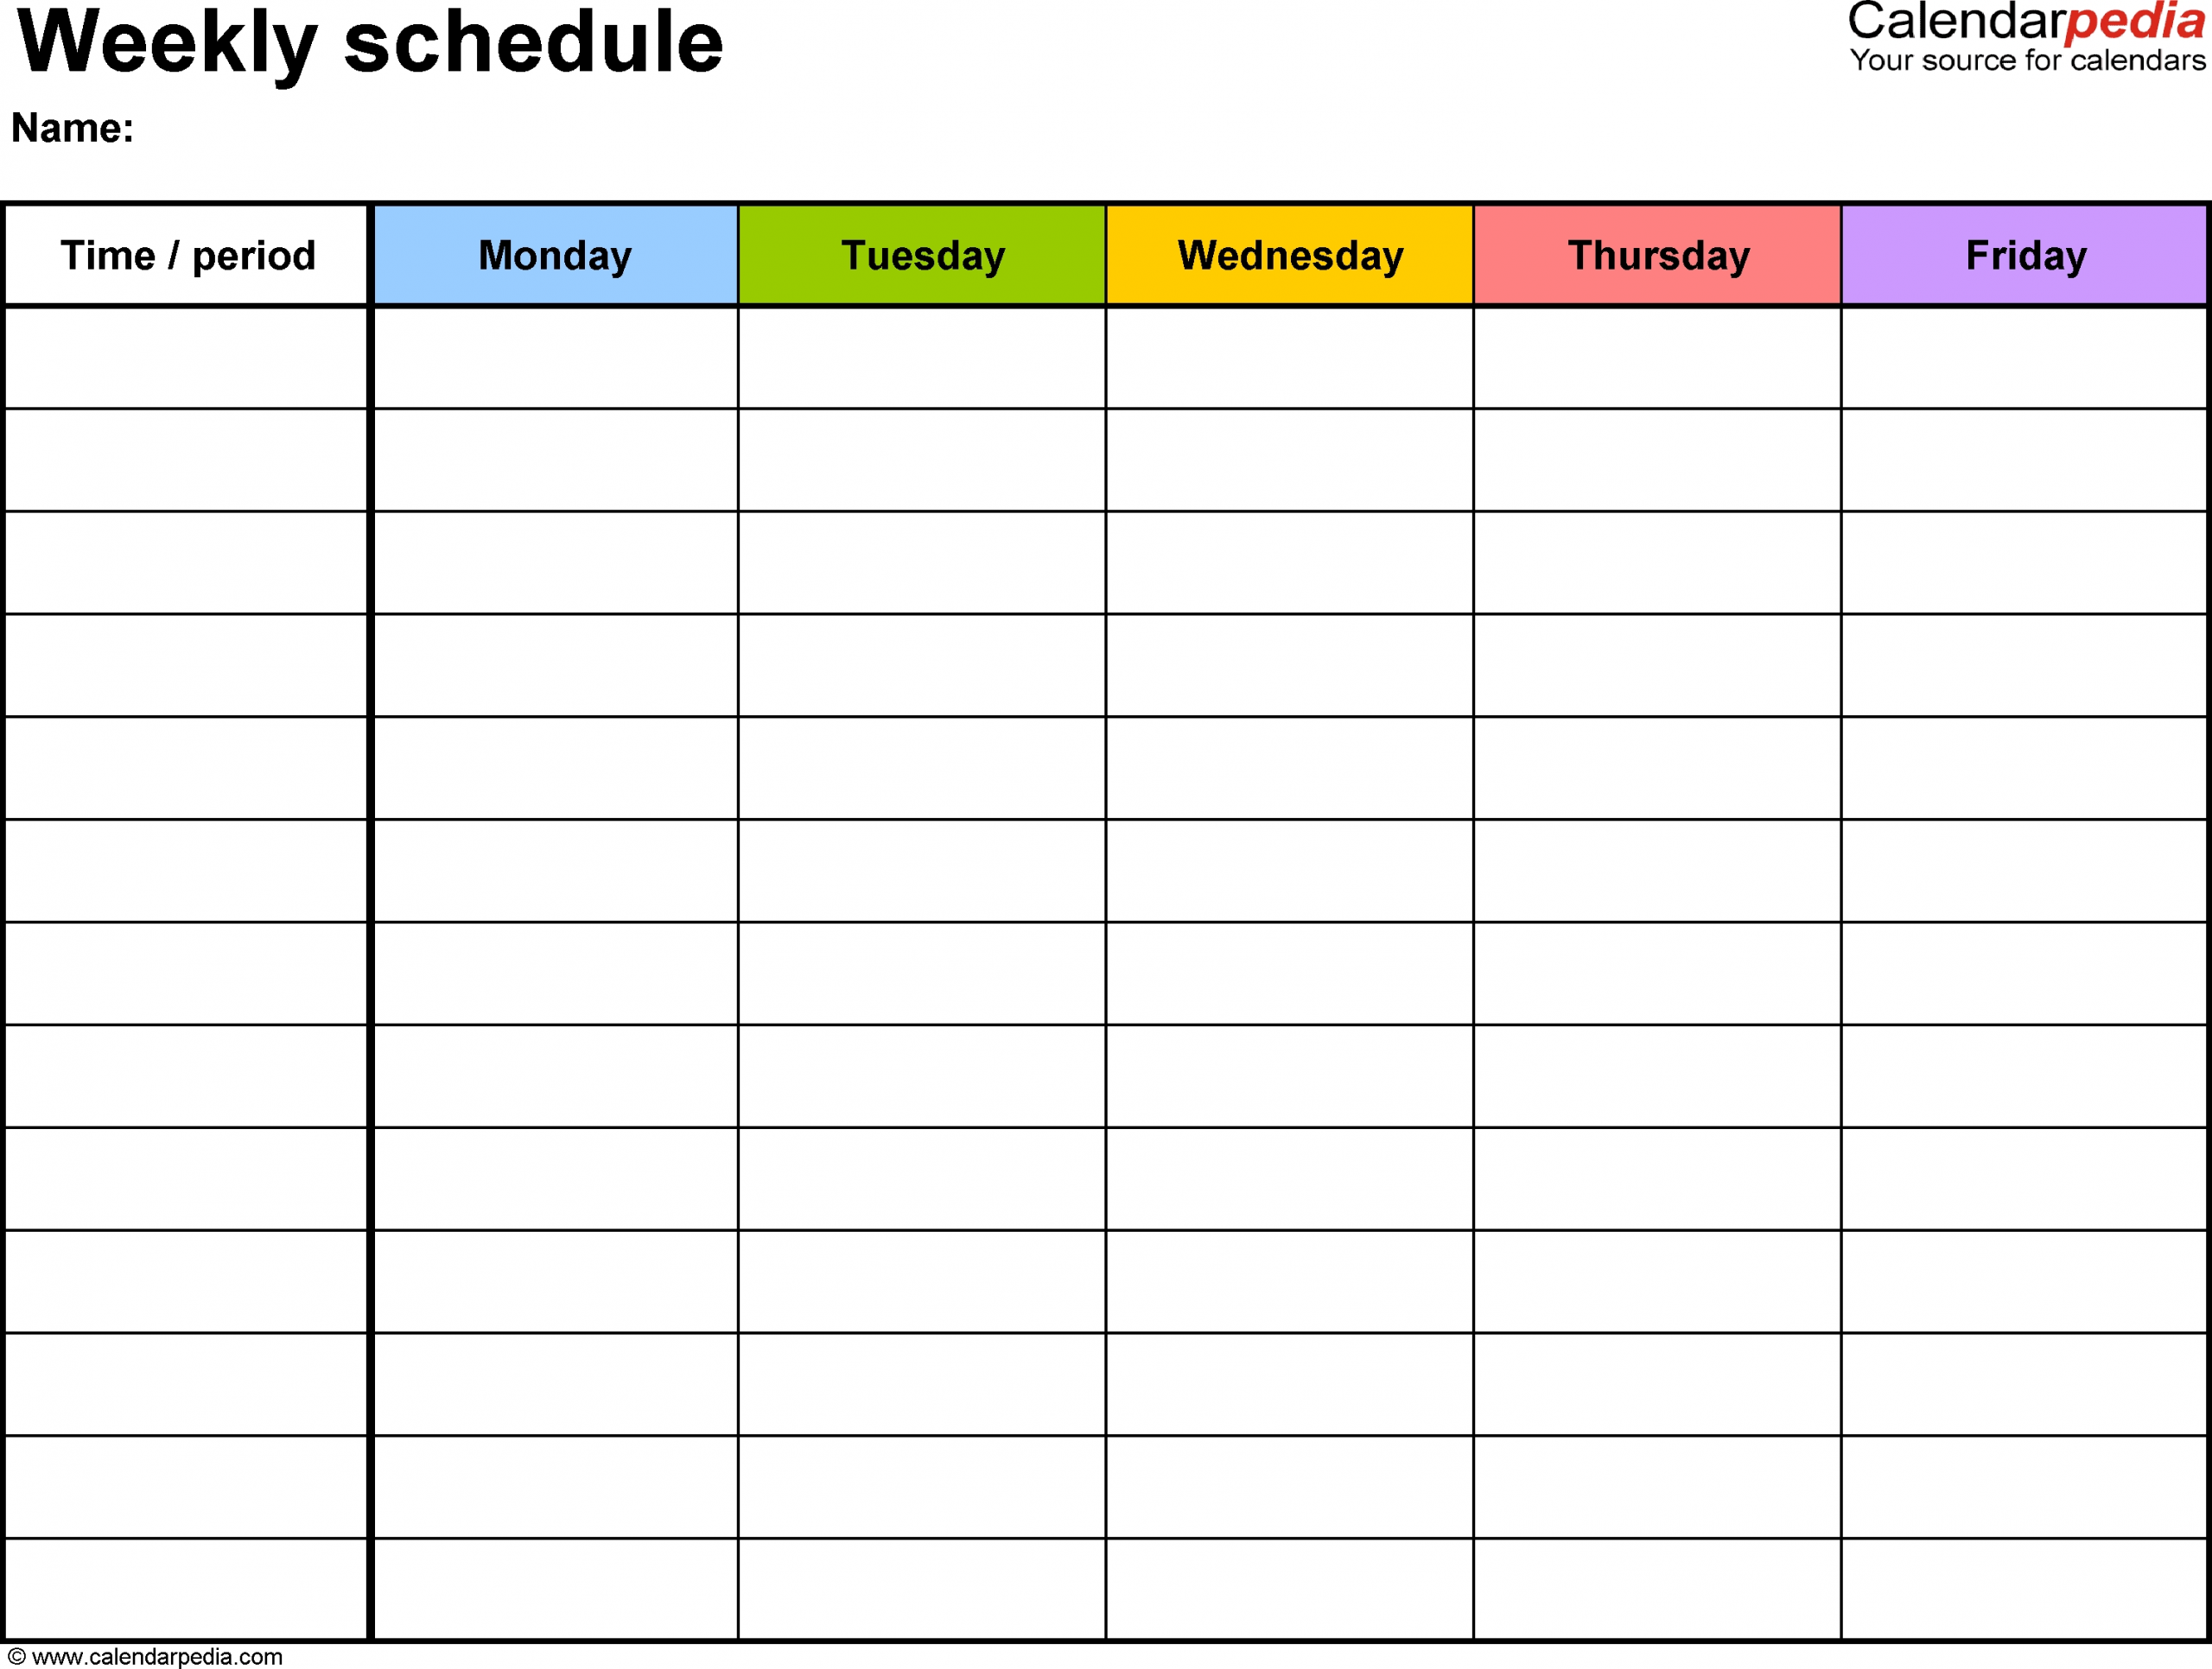 Free Weekly Schedule Templates For Word - 18 Templates for Free Printable Blank Weekly Calendar Templates